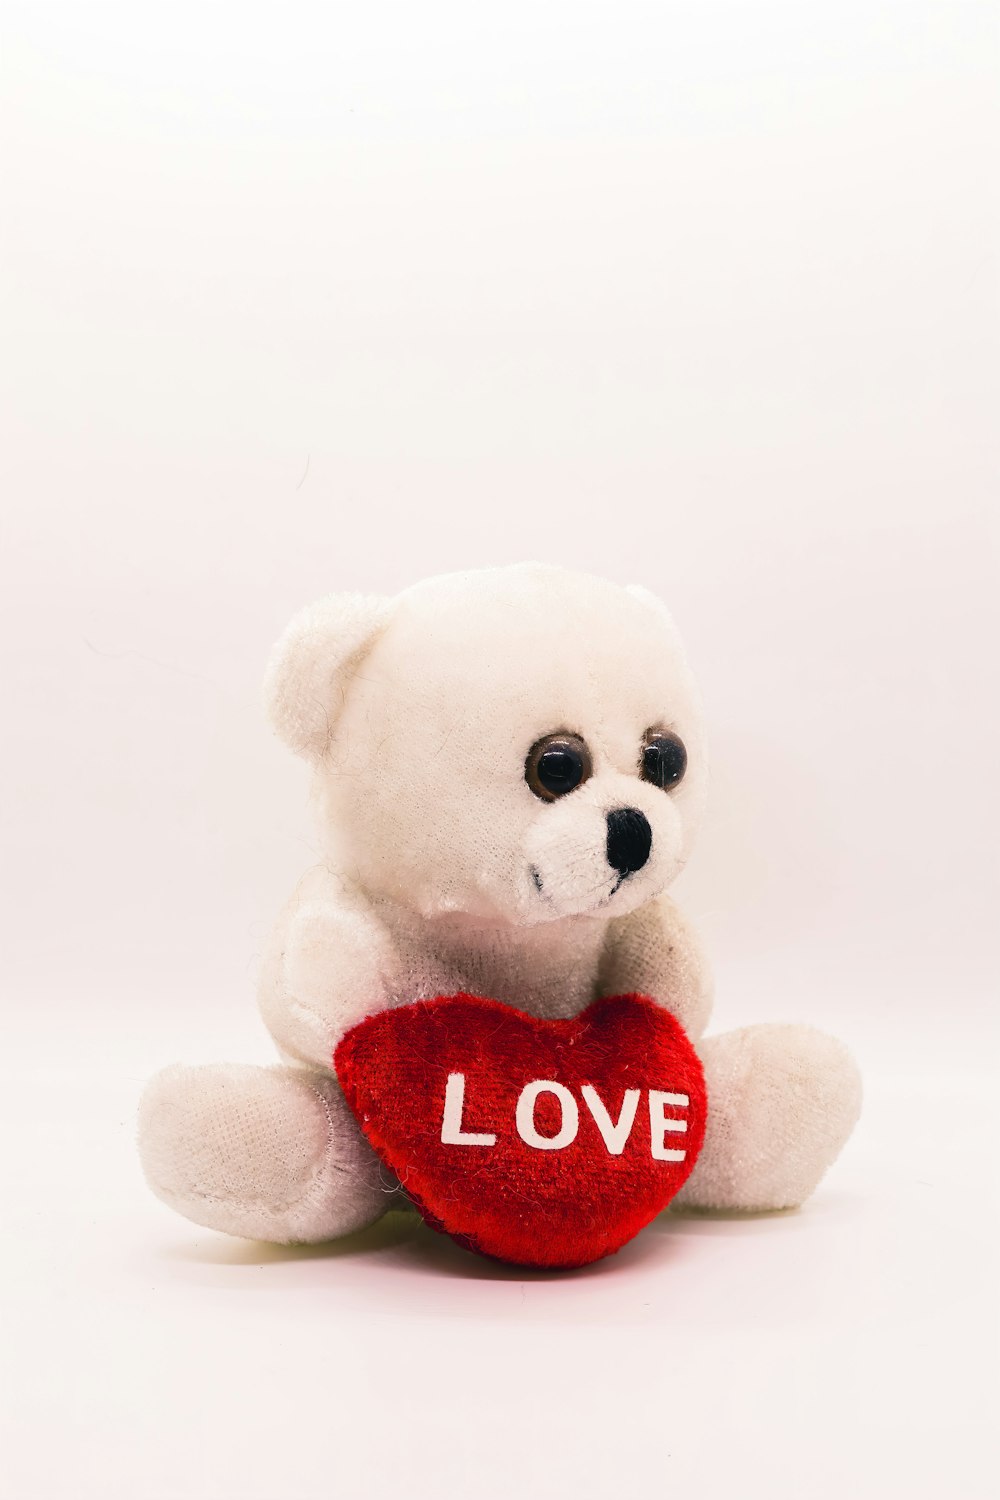 a white teddy bear holding a red heart